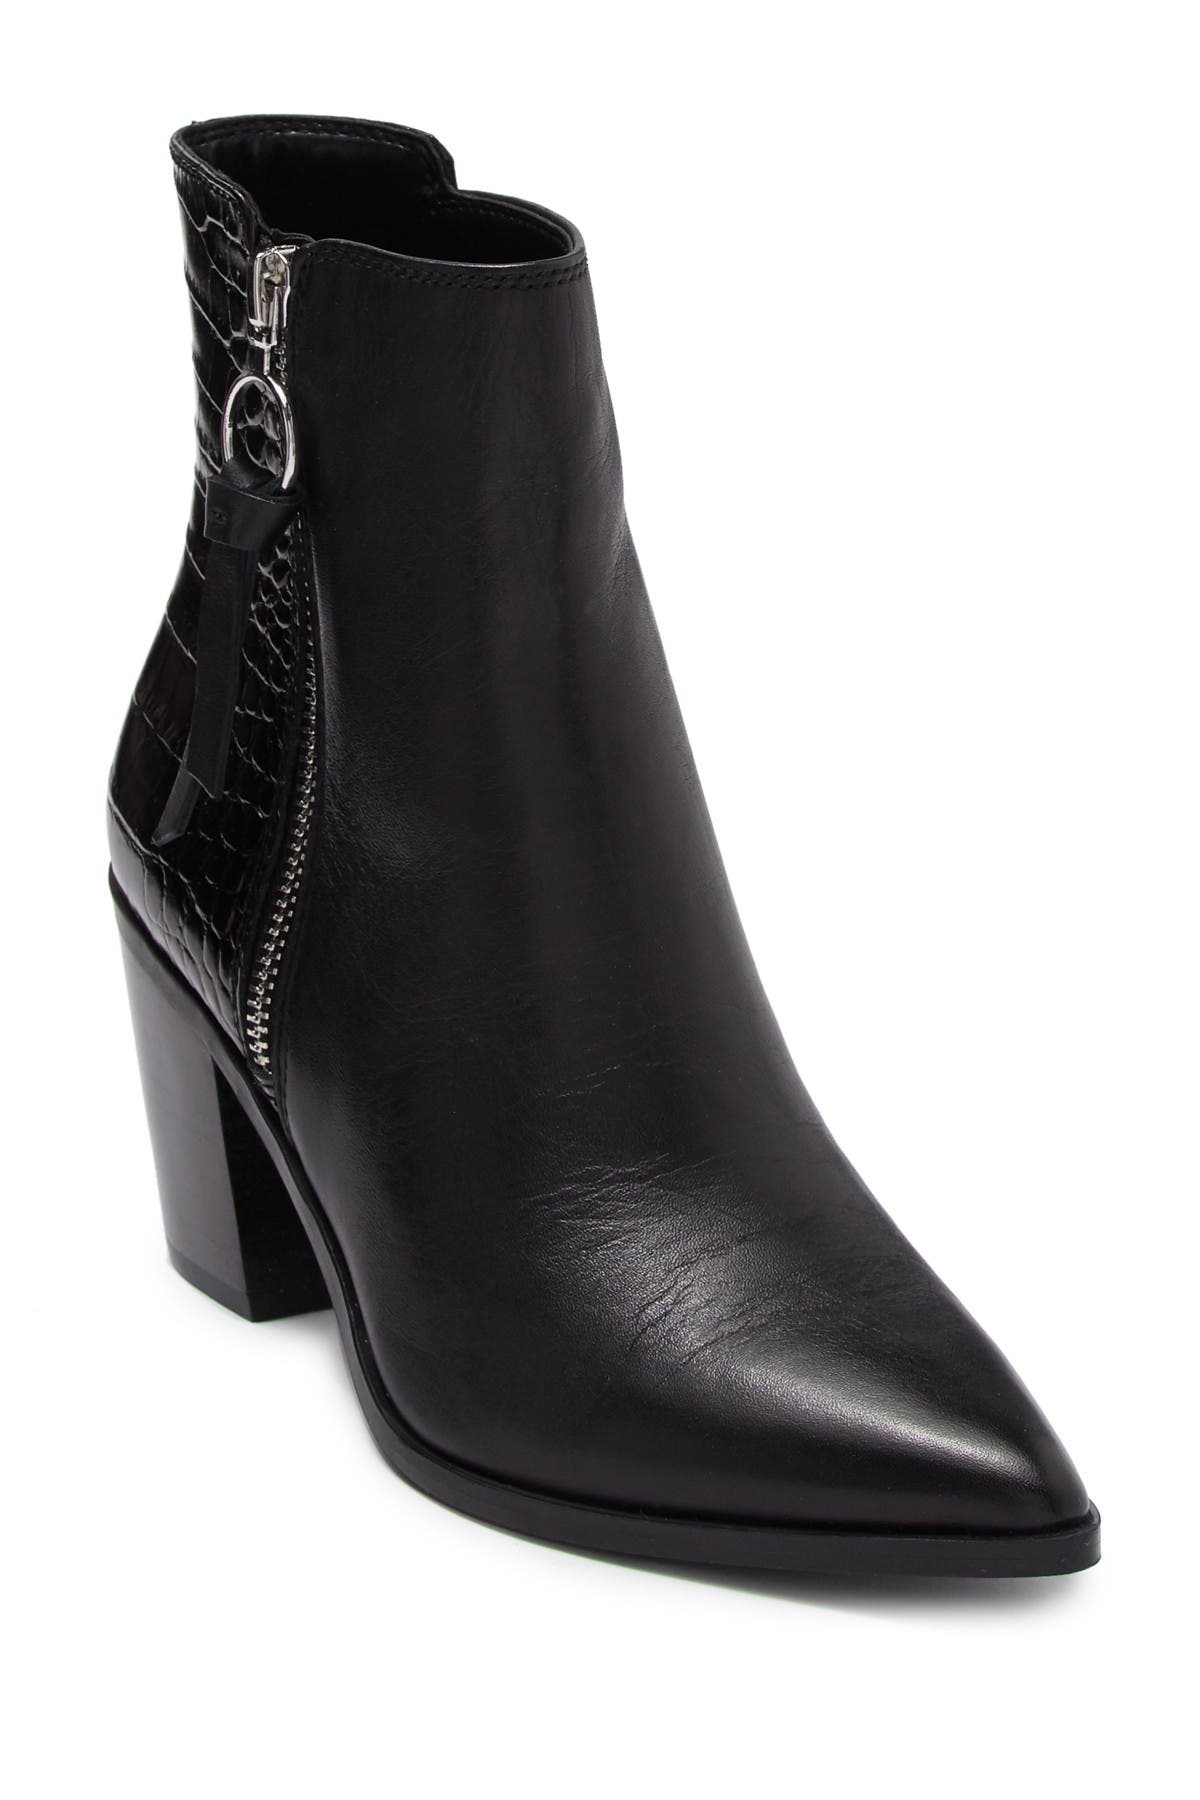 aldo black leather ankle boots